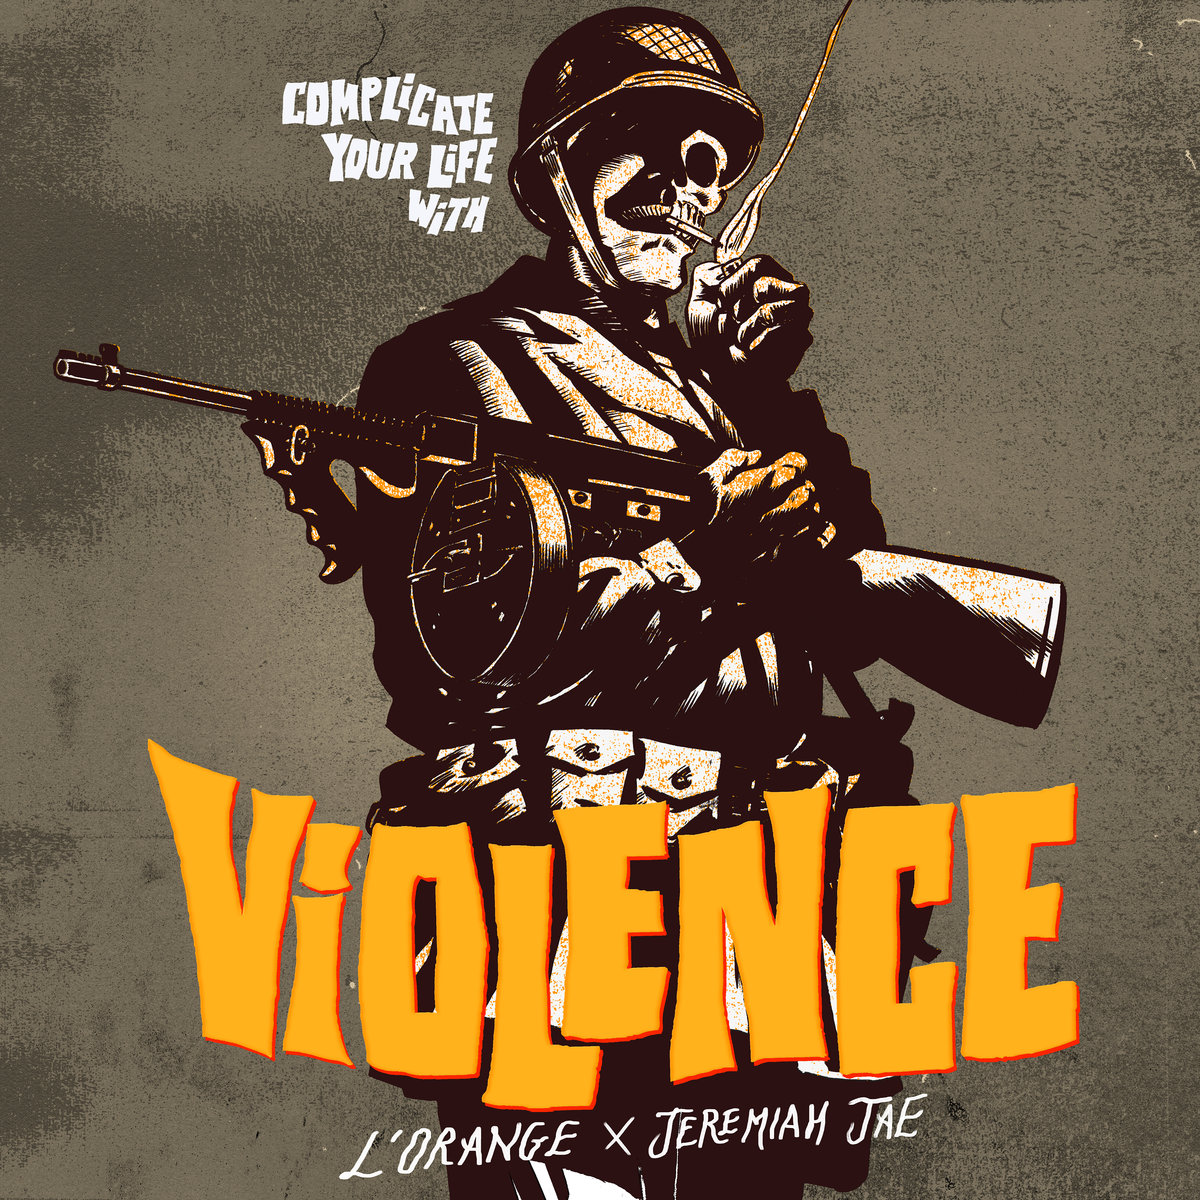 Complicate_your_life_with_violence_l_orange___jeremiah_jae